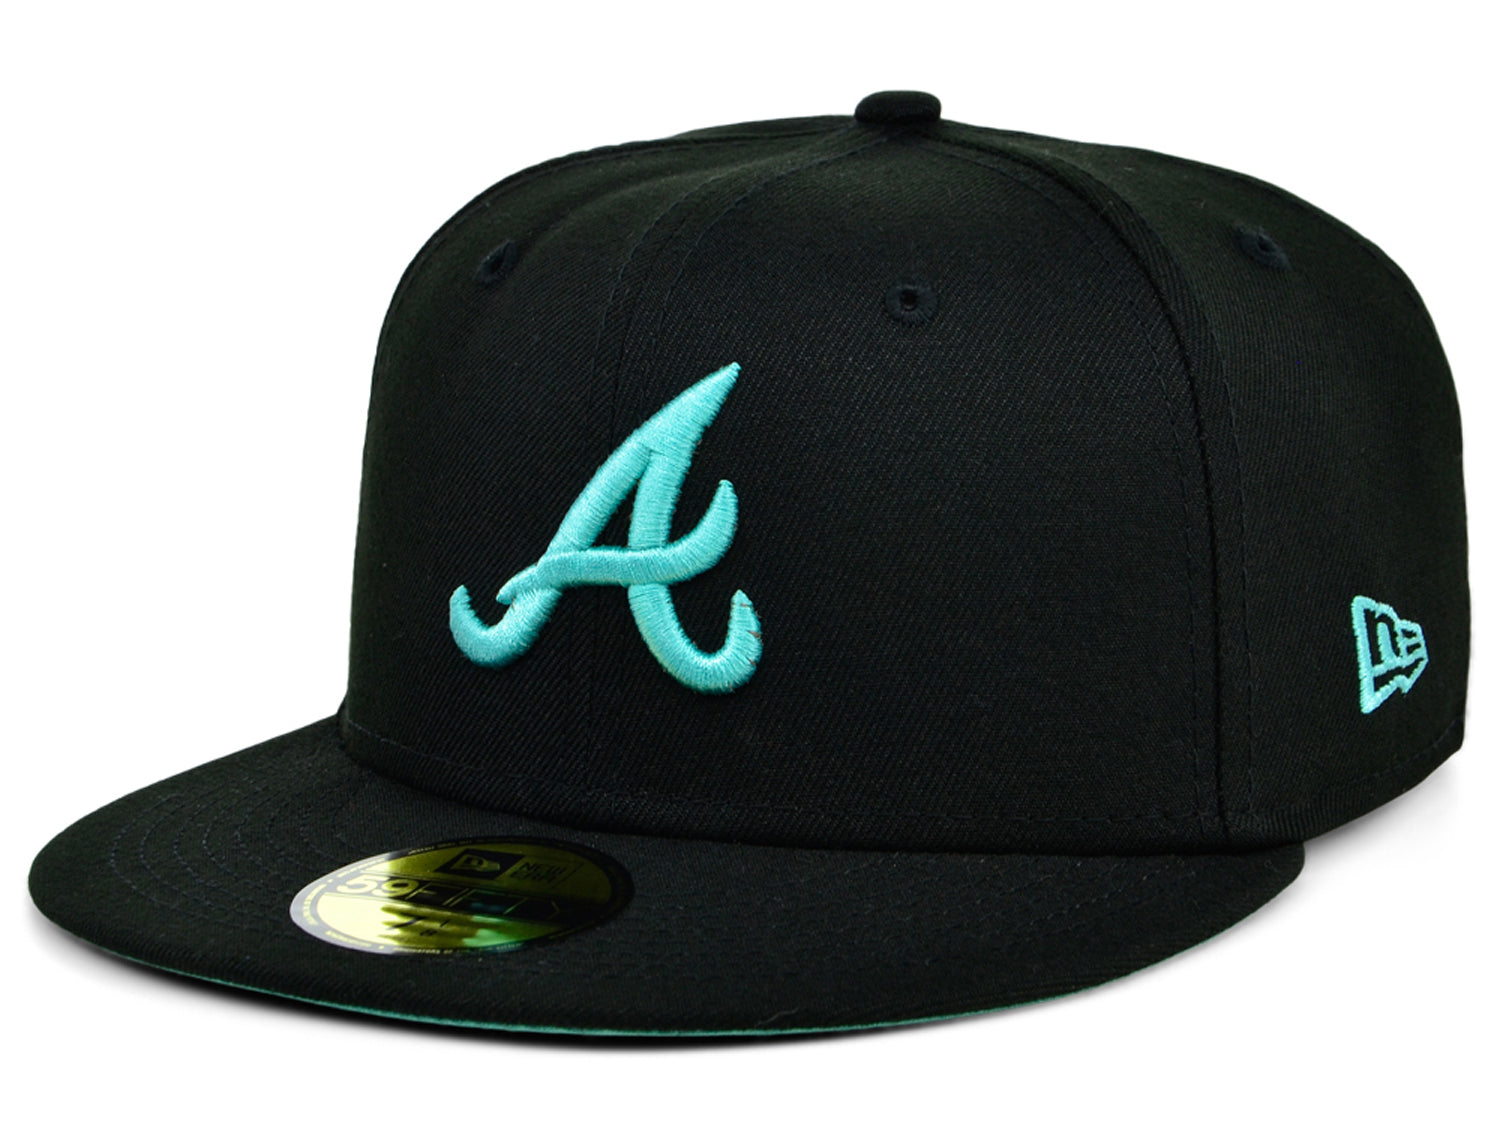 Lids Atlanta Braves New Era Multi-Color Pack 59FIFTY Fitted Hat - Black